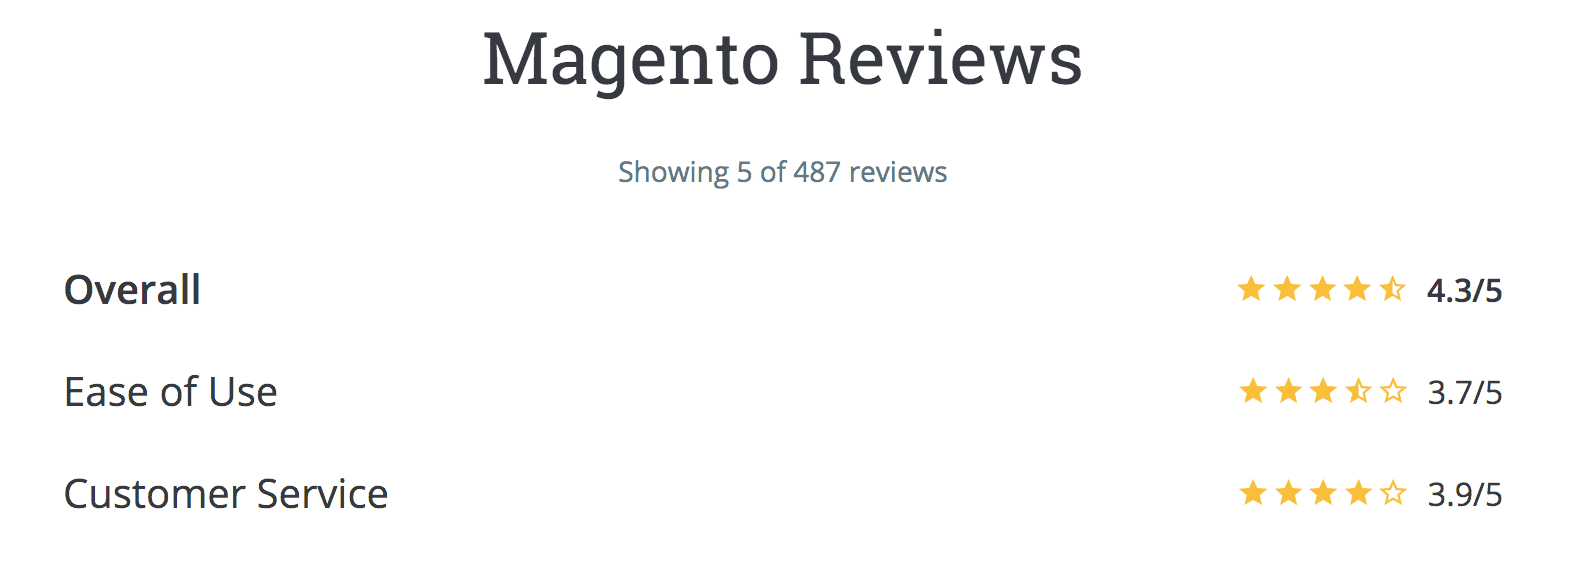 Magento Overall Rating